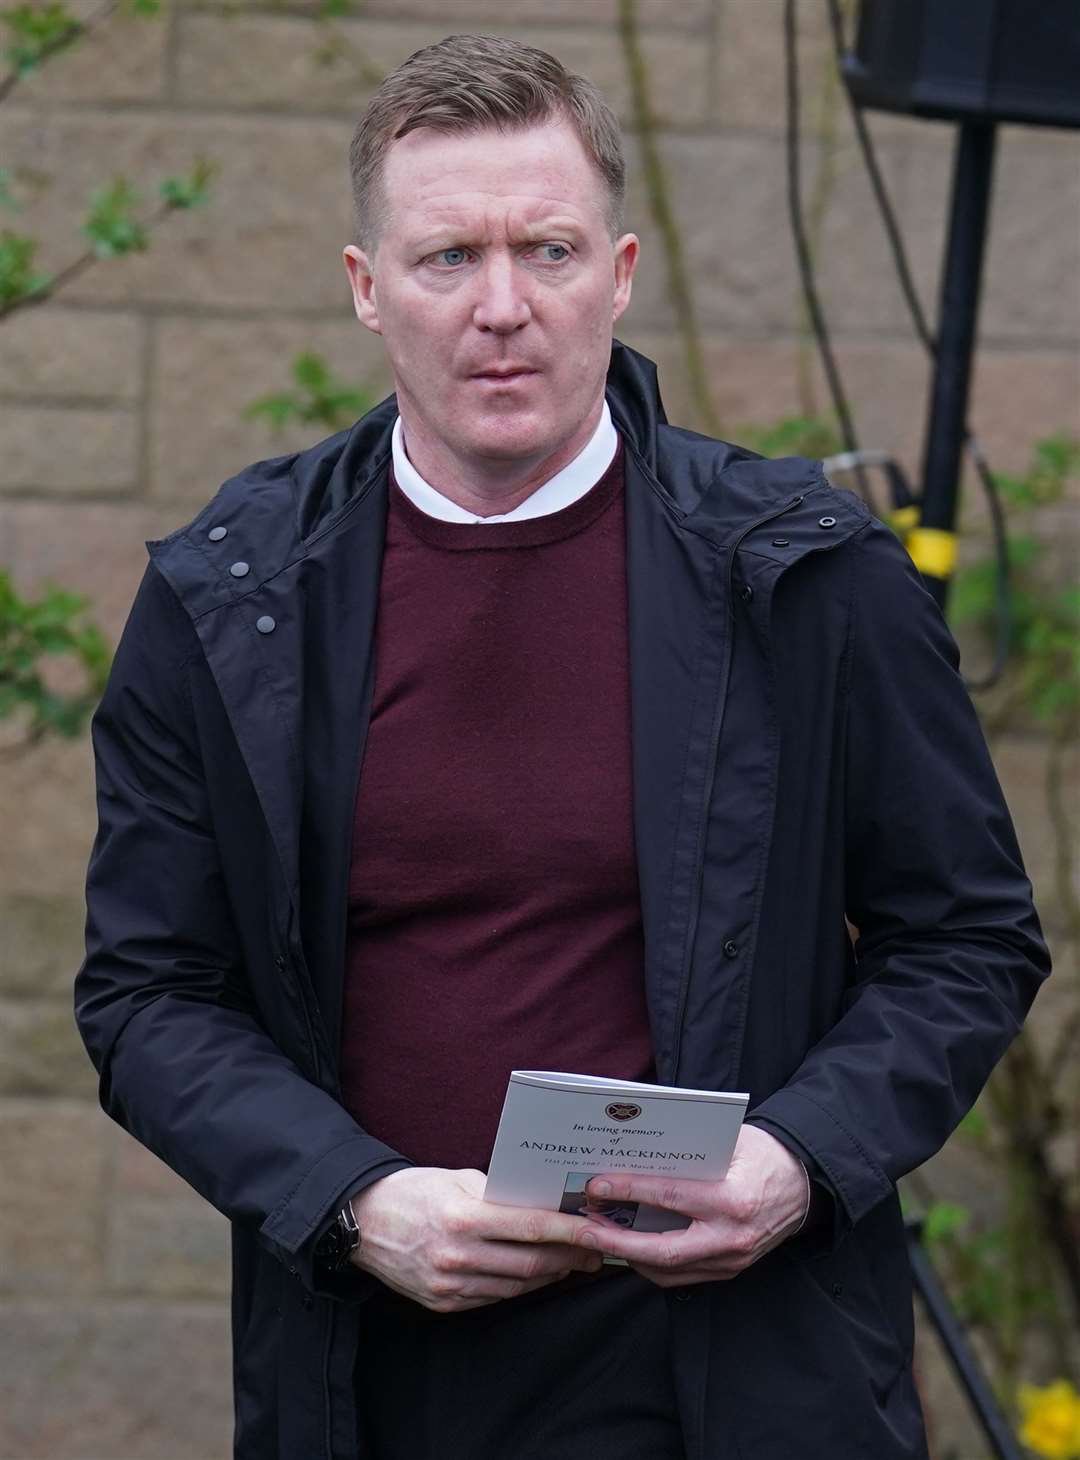 Former Hearts player Gary Locke was among the mourners at the funeral (Andrew Milligan/PA)